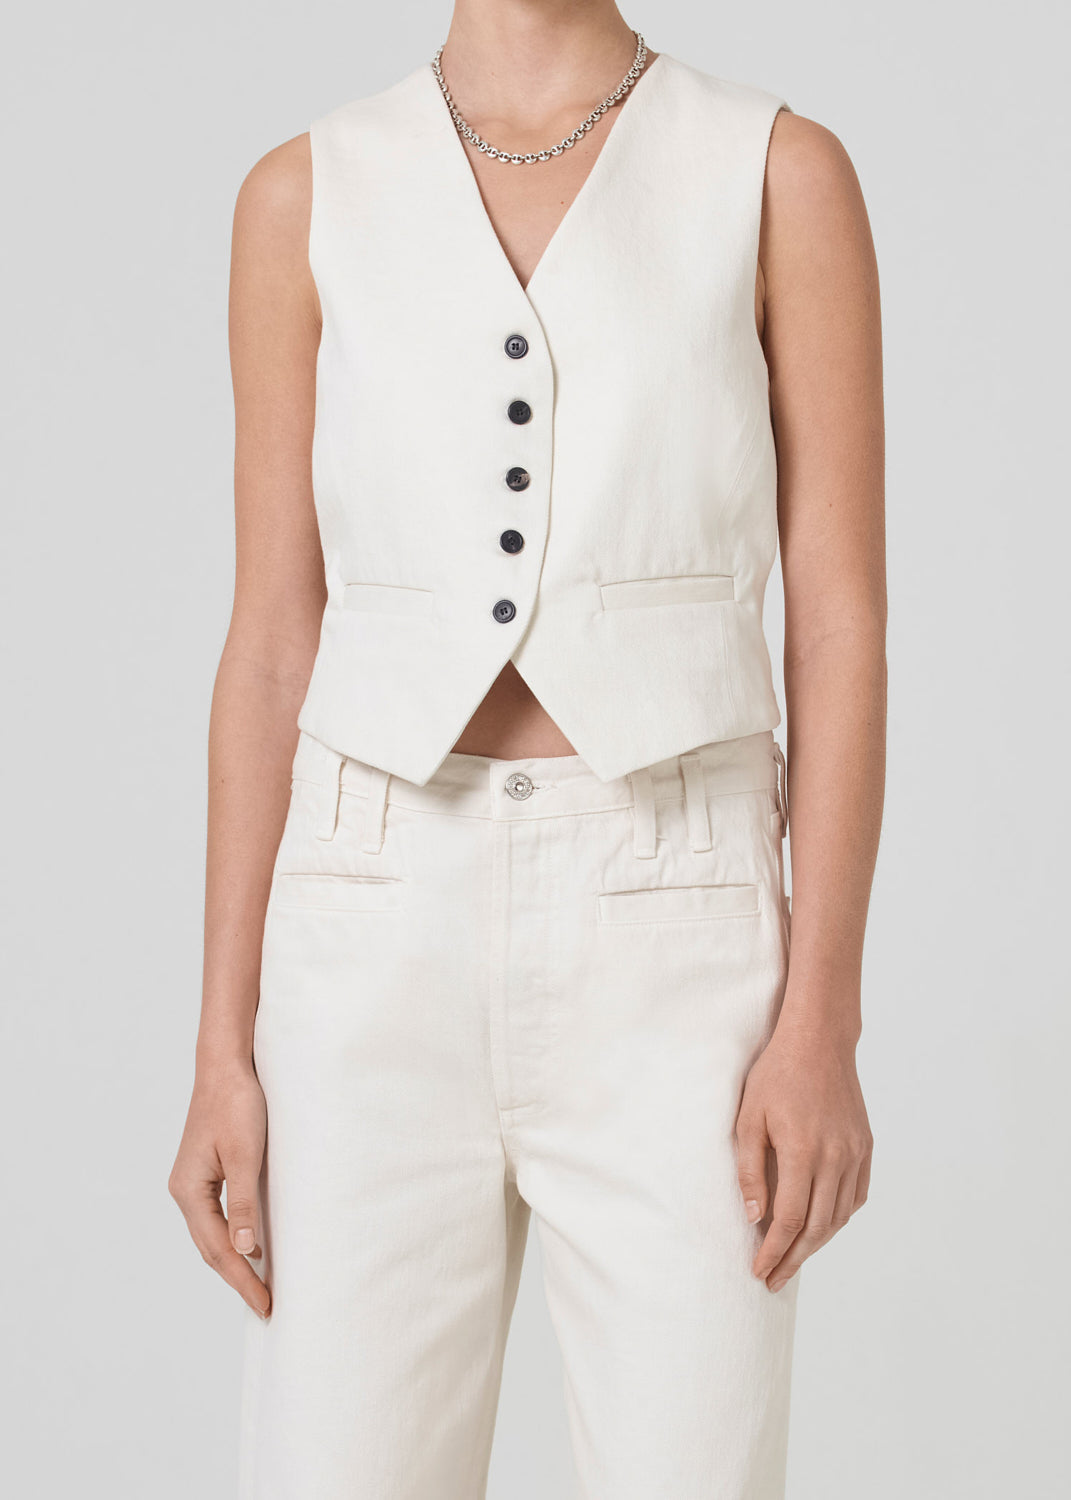 Citizens Of Humanity Sierra Vest in Marzipan available at TNT The New Trend Australia.